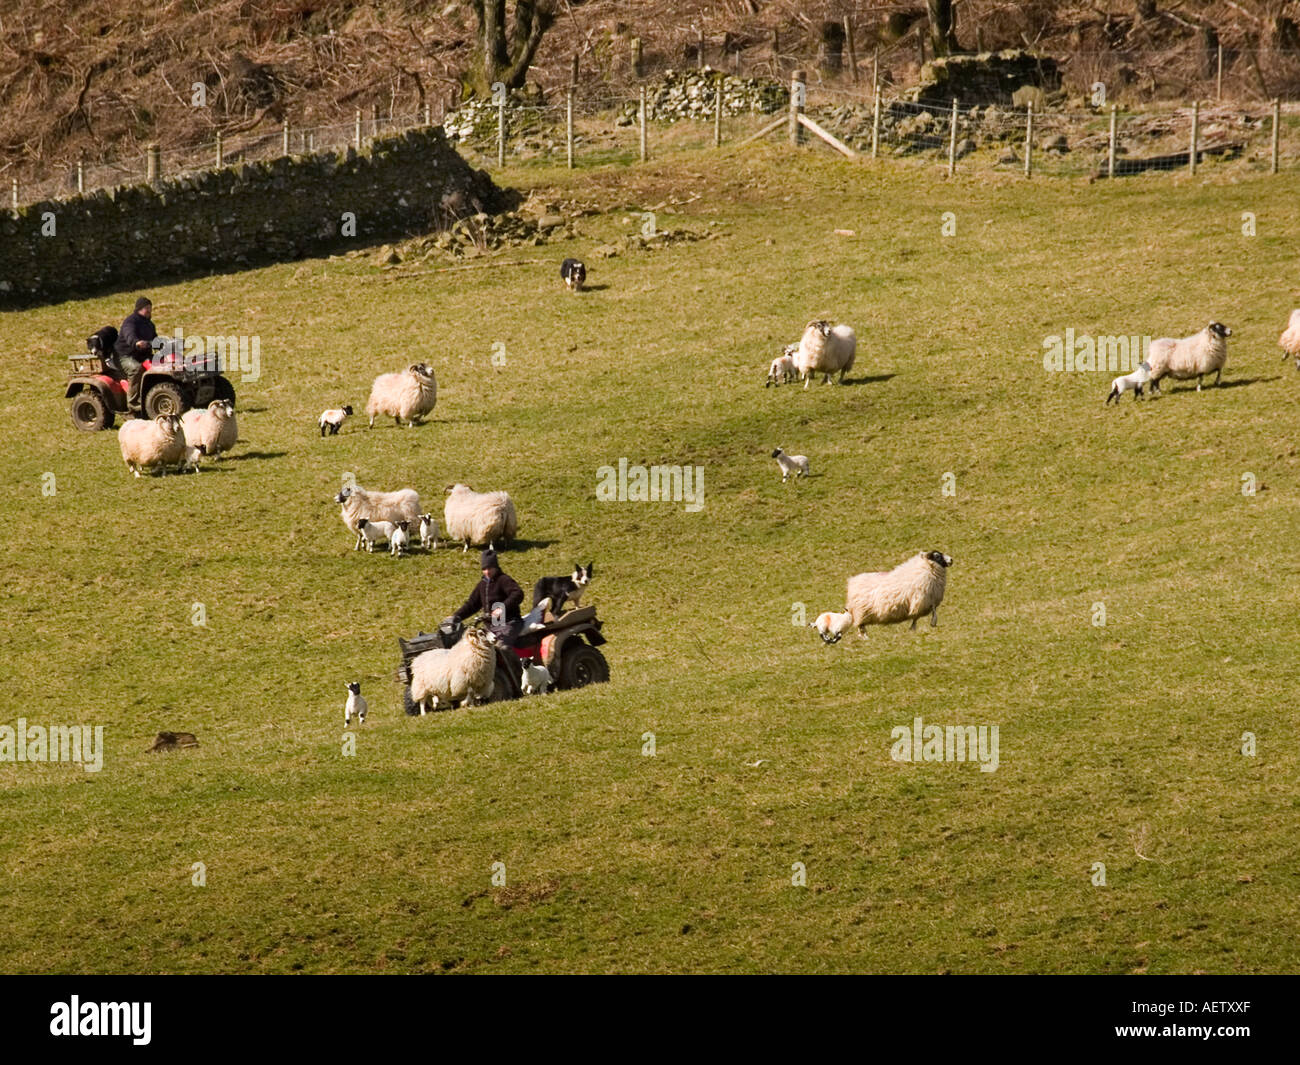 Shepherds use their dogs and quad bikes to round up ewes and newborn lambs. Stock Photo